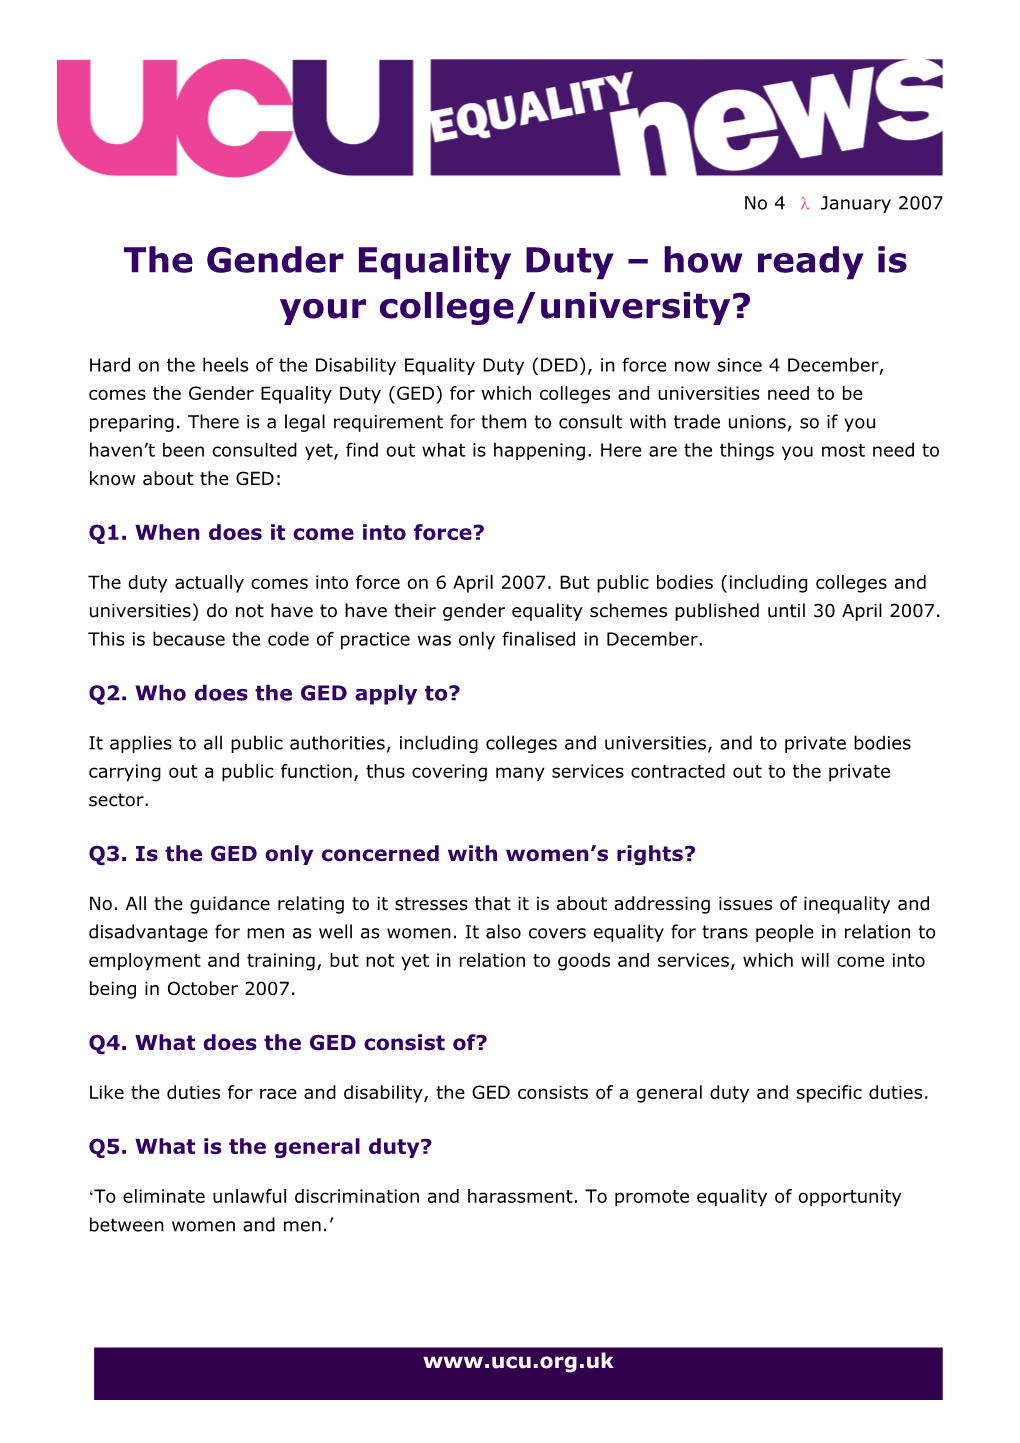 The Gender Equality Duty How Ready Is Your College/University?